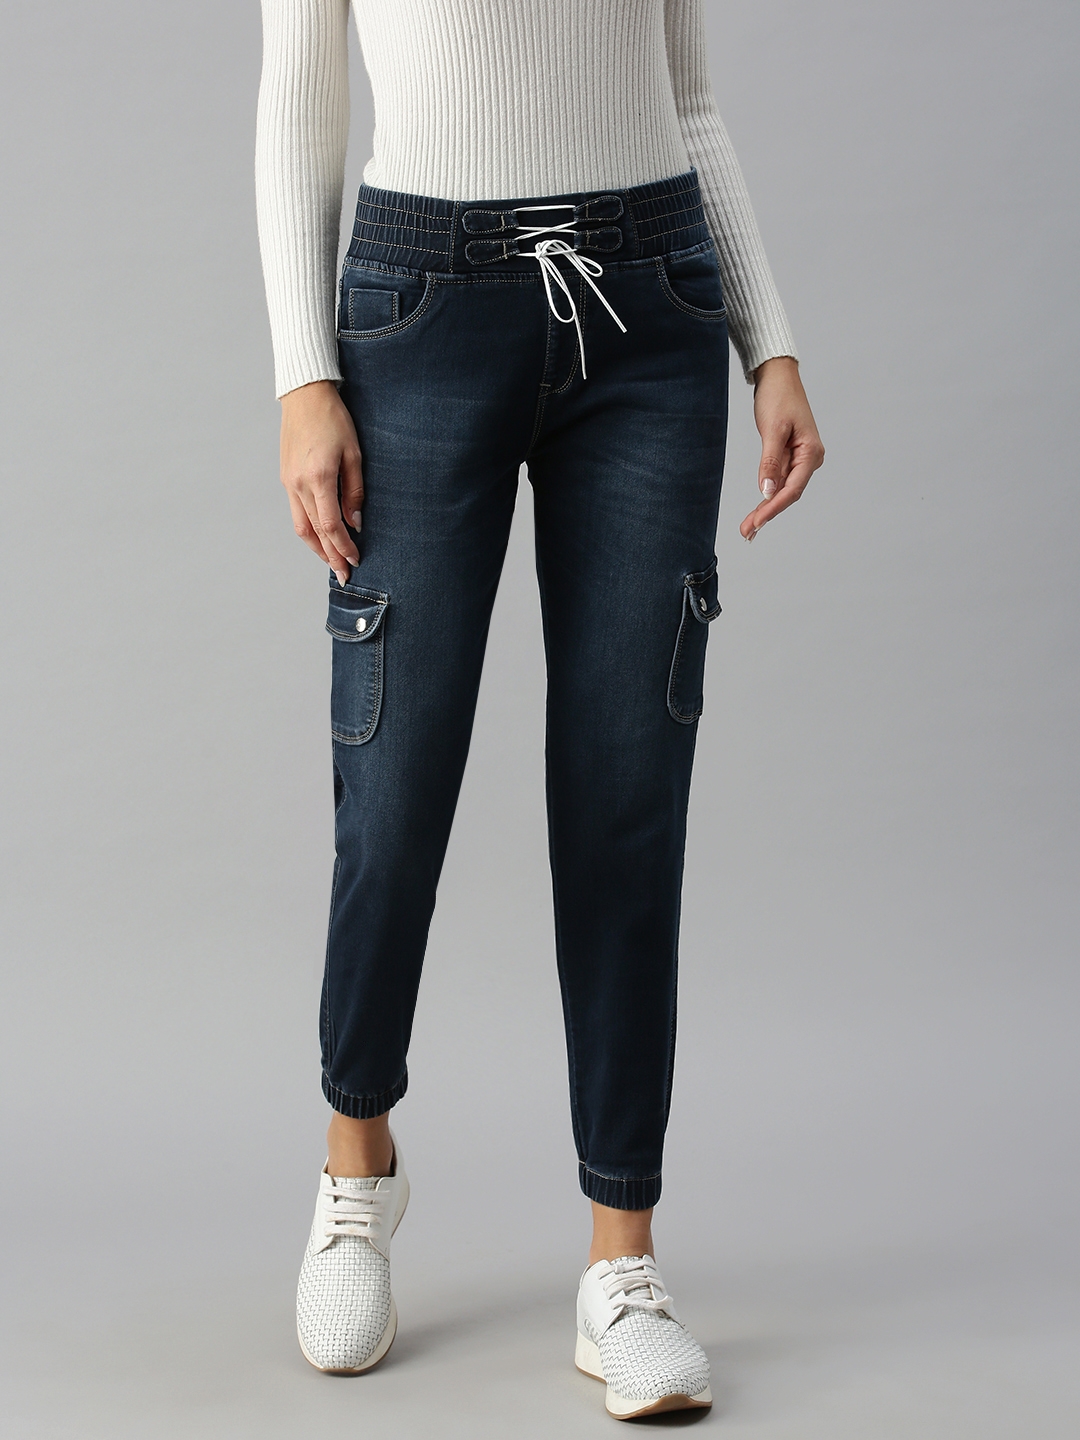 Showoff Women's Jogger Clean Look Blue Jeans